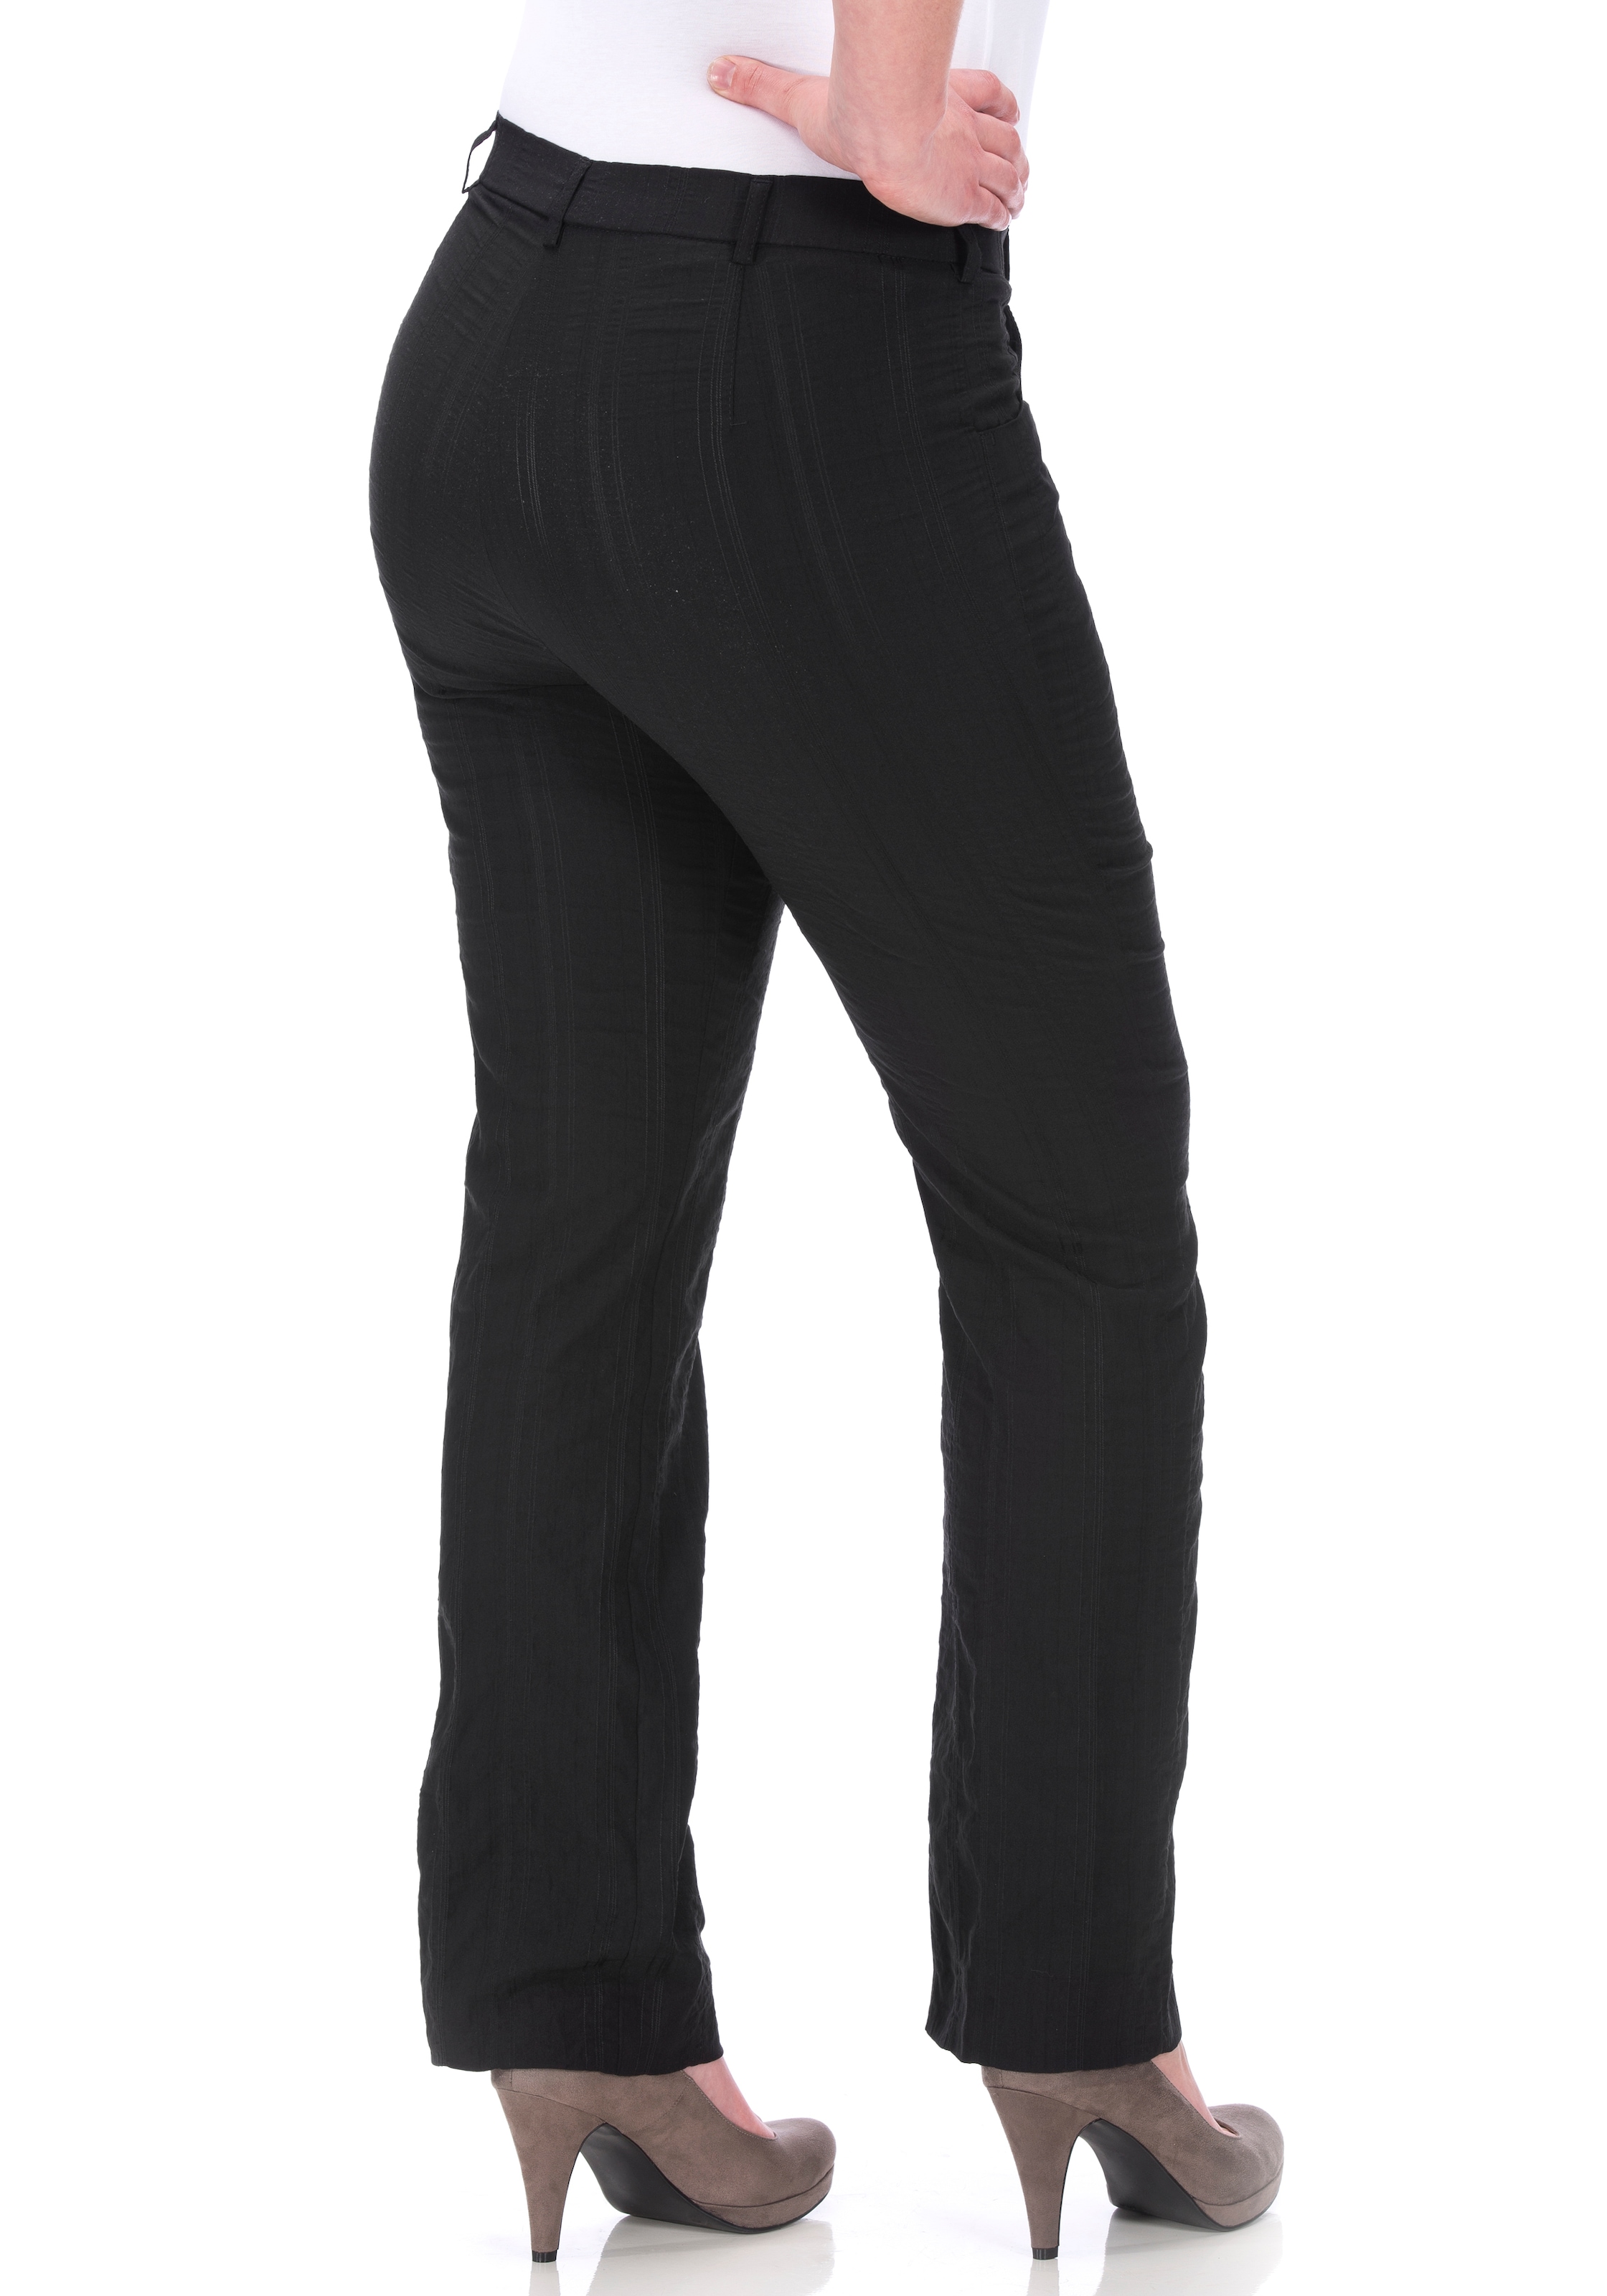 ♕ optimale in bei Passform »Bea«, Quer-Stretch Stoffhose KjBRAND